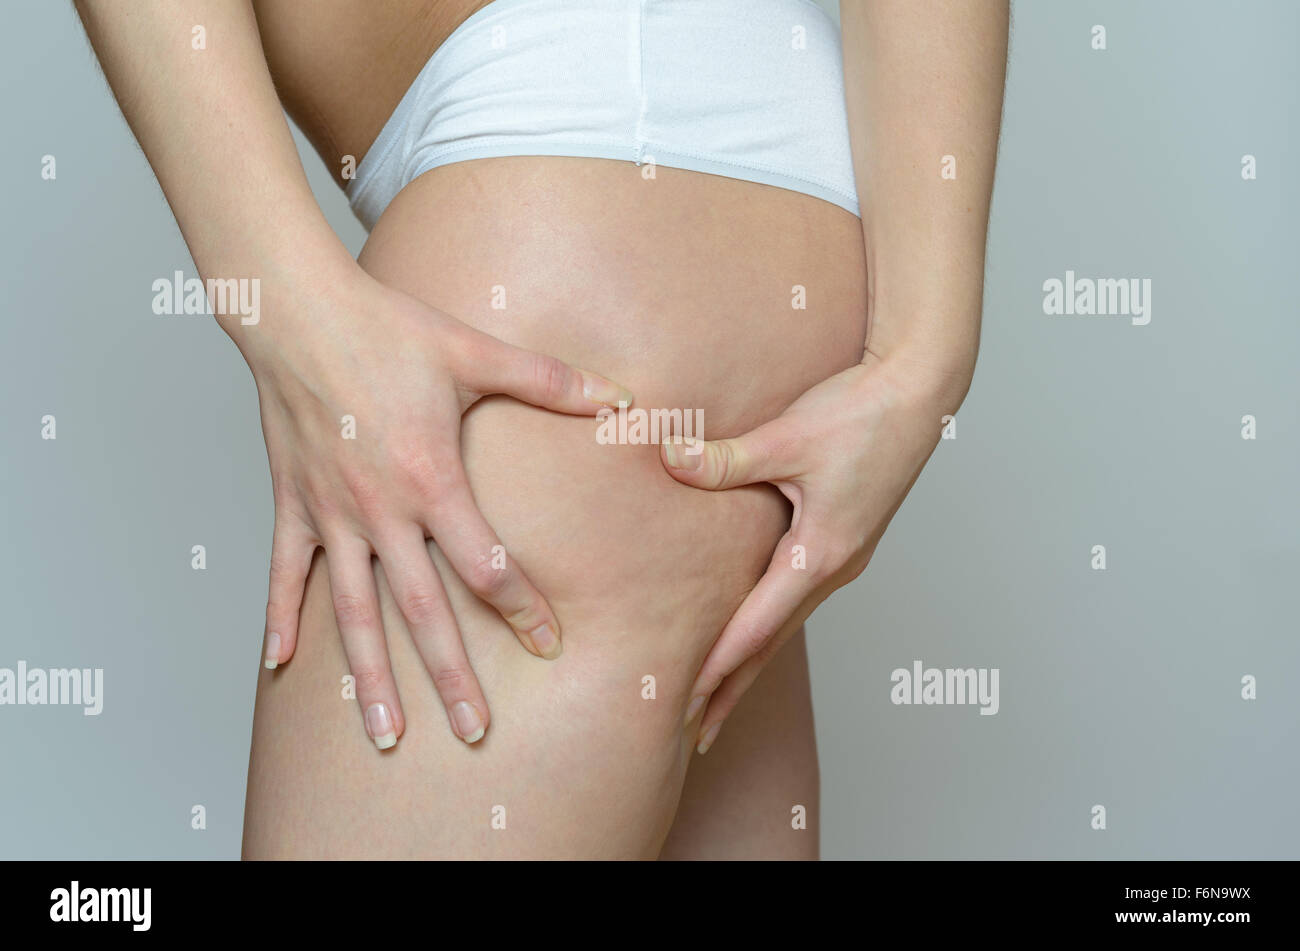 Close up Young Woman Pinches the Cellulite Area on her Thigh Using Two Hands Against Gray Background. Stock Photo